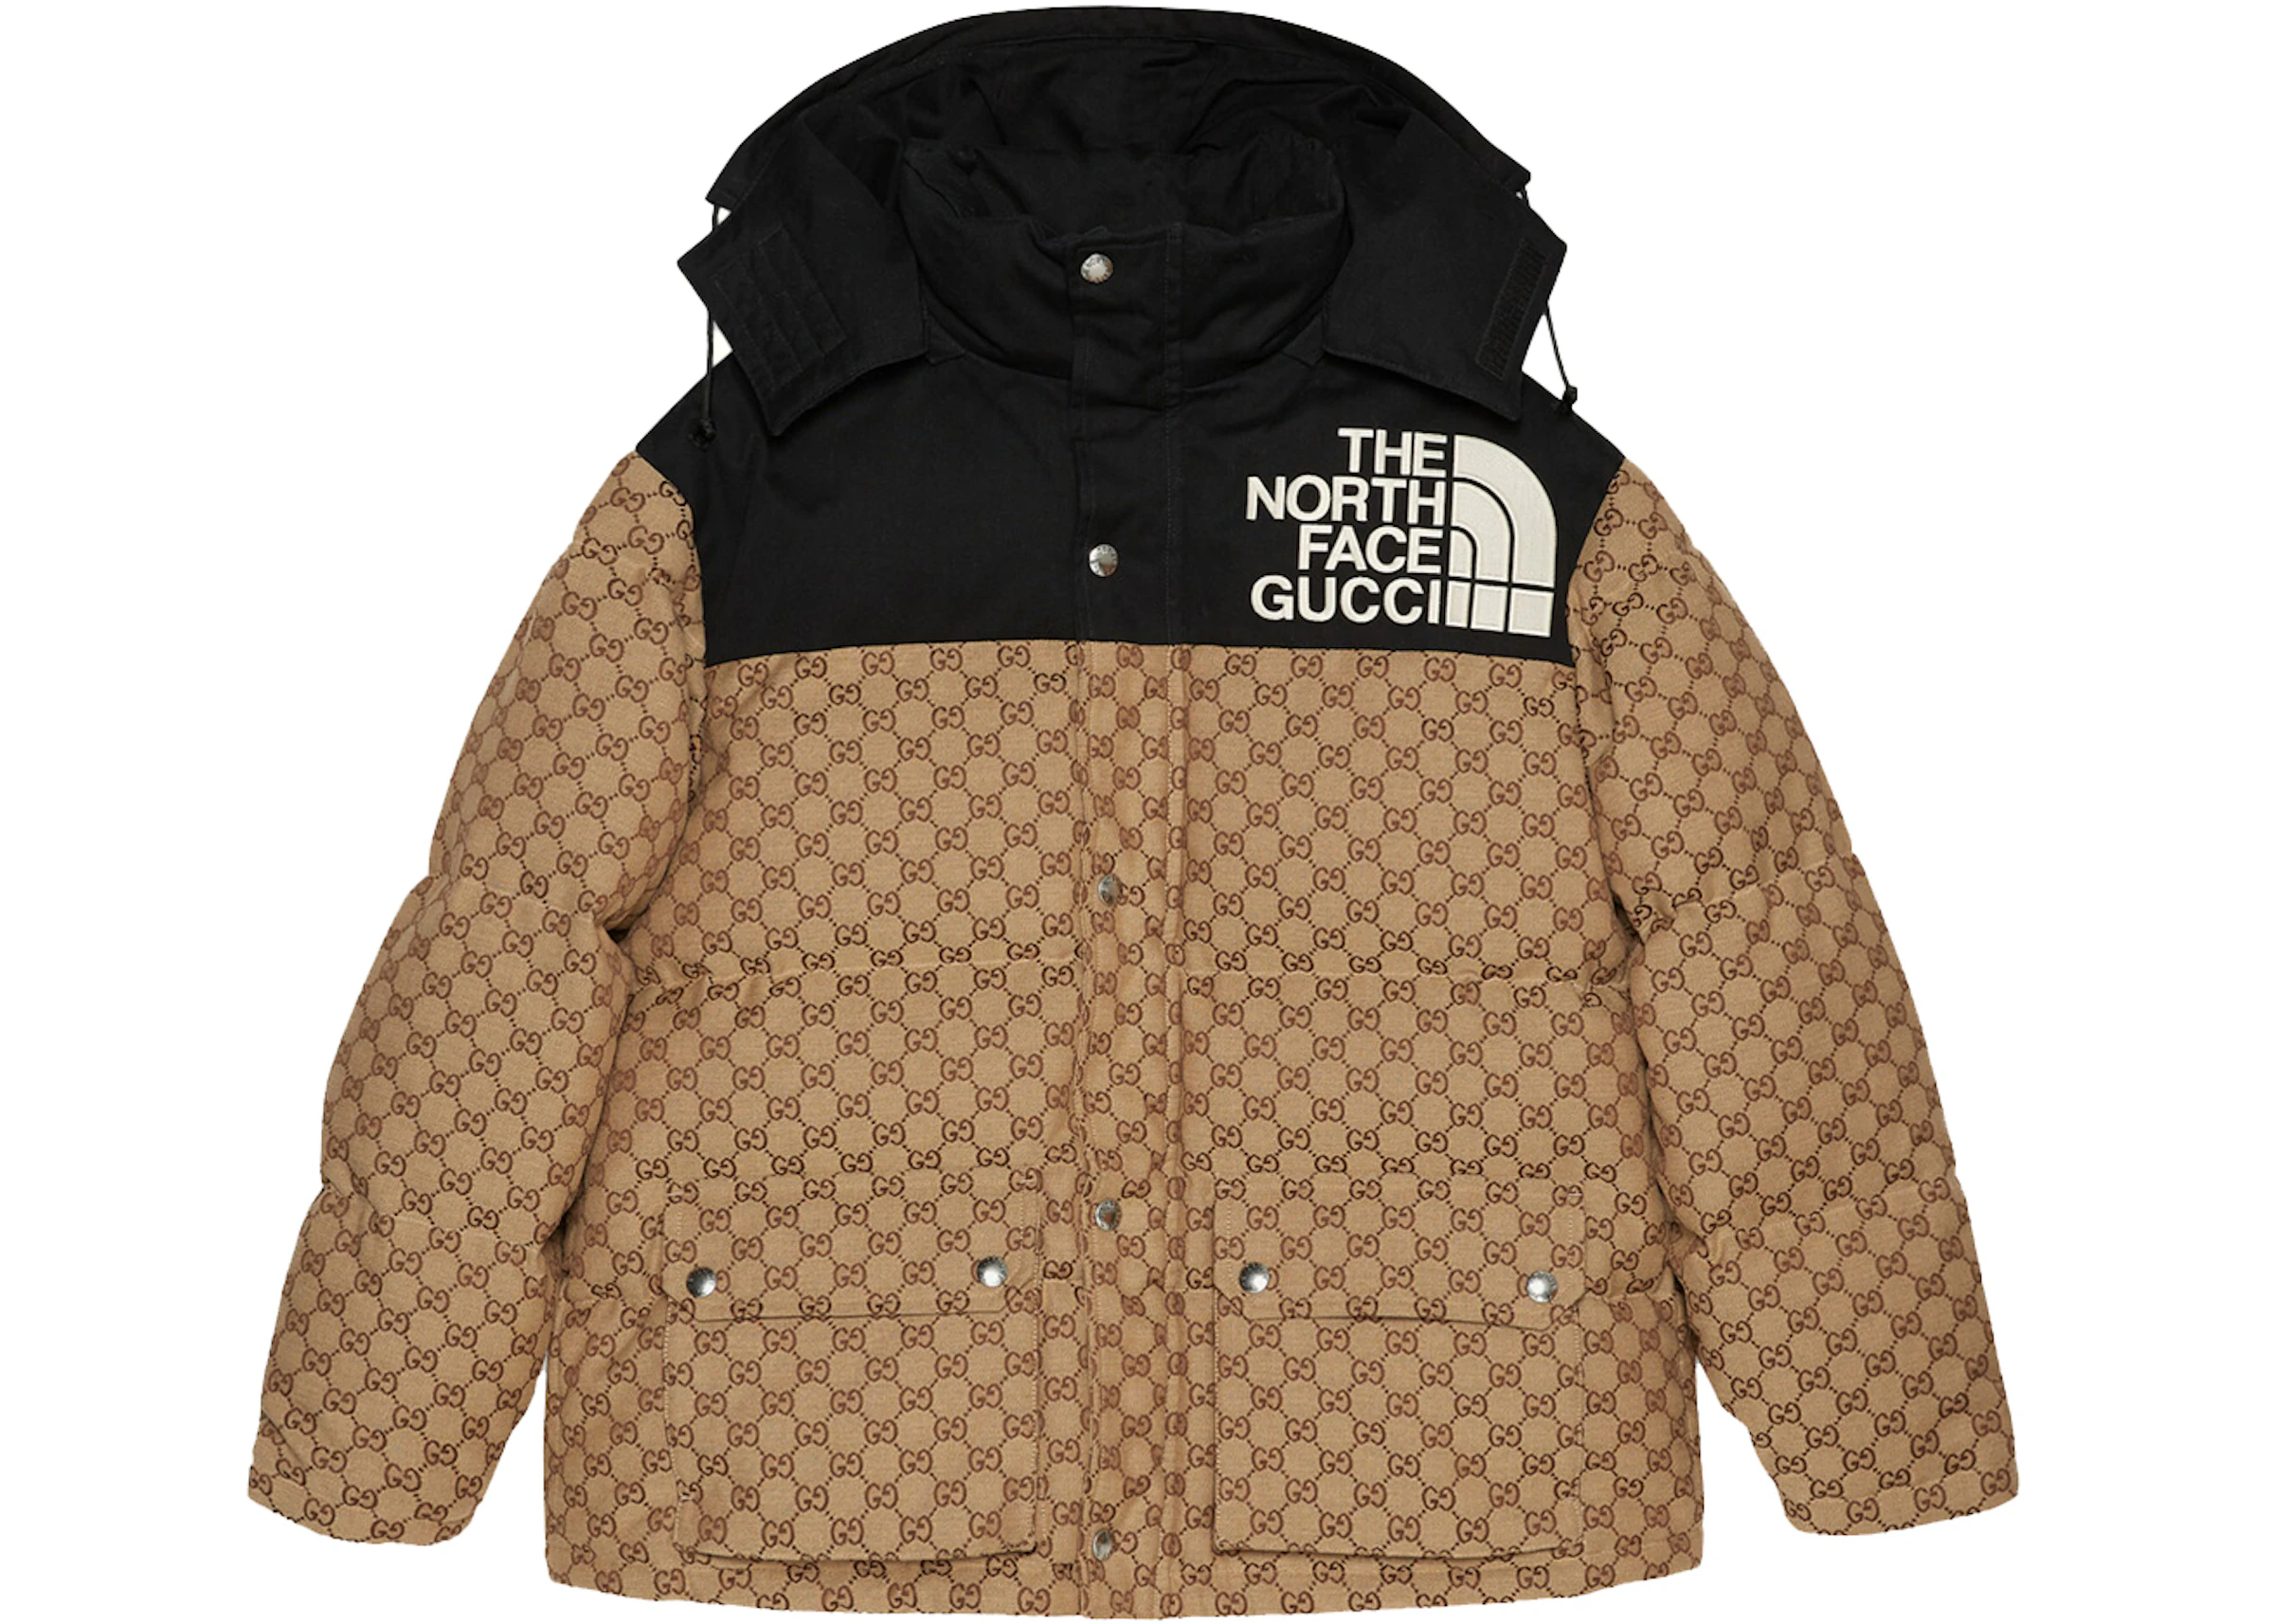 Gucci x The North Face Womens GG Padded Jacket Black Ebony Beige - SS21 - US